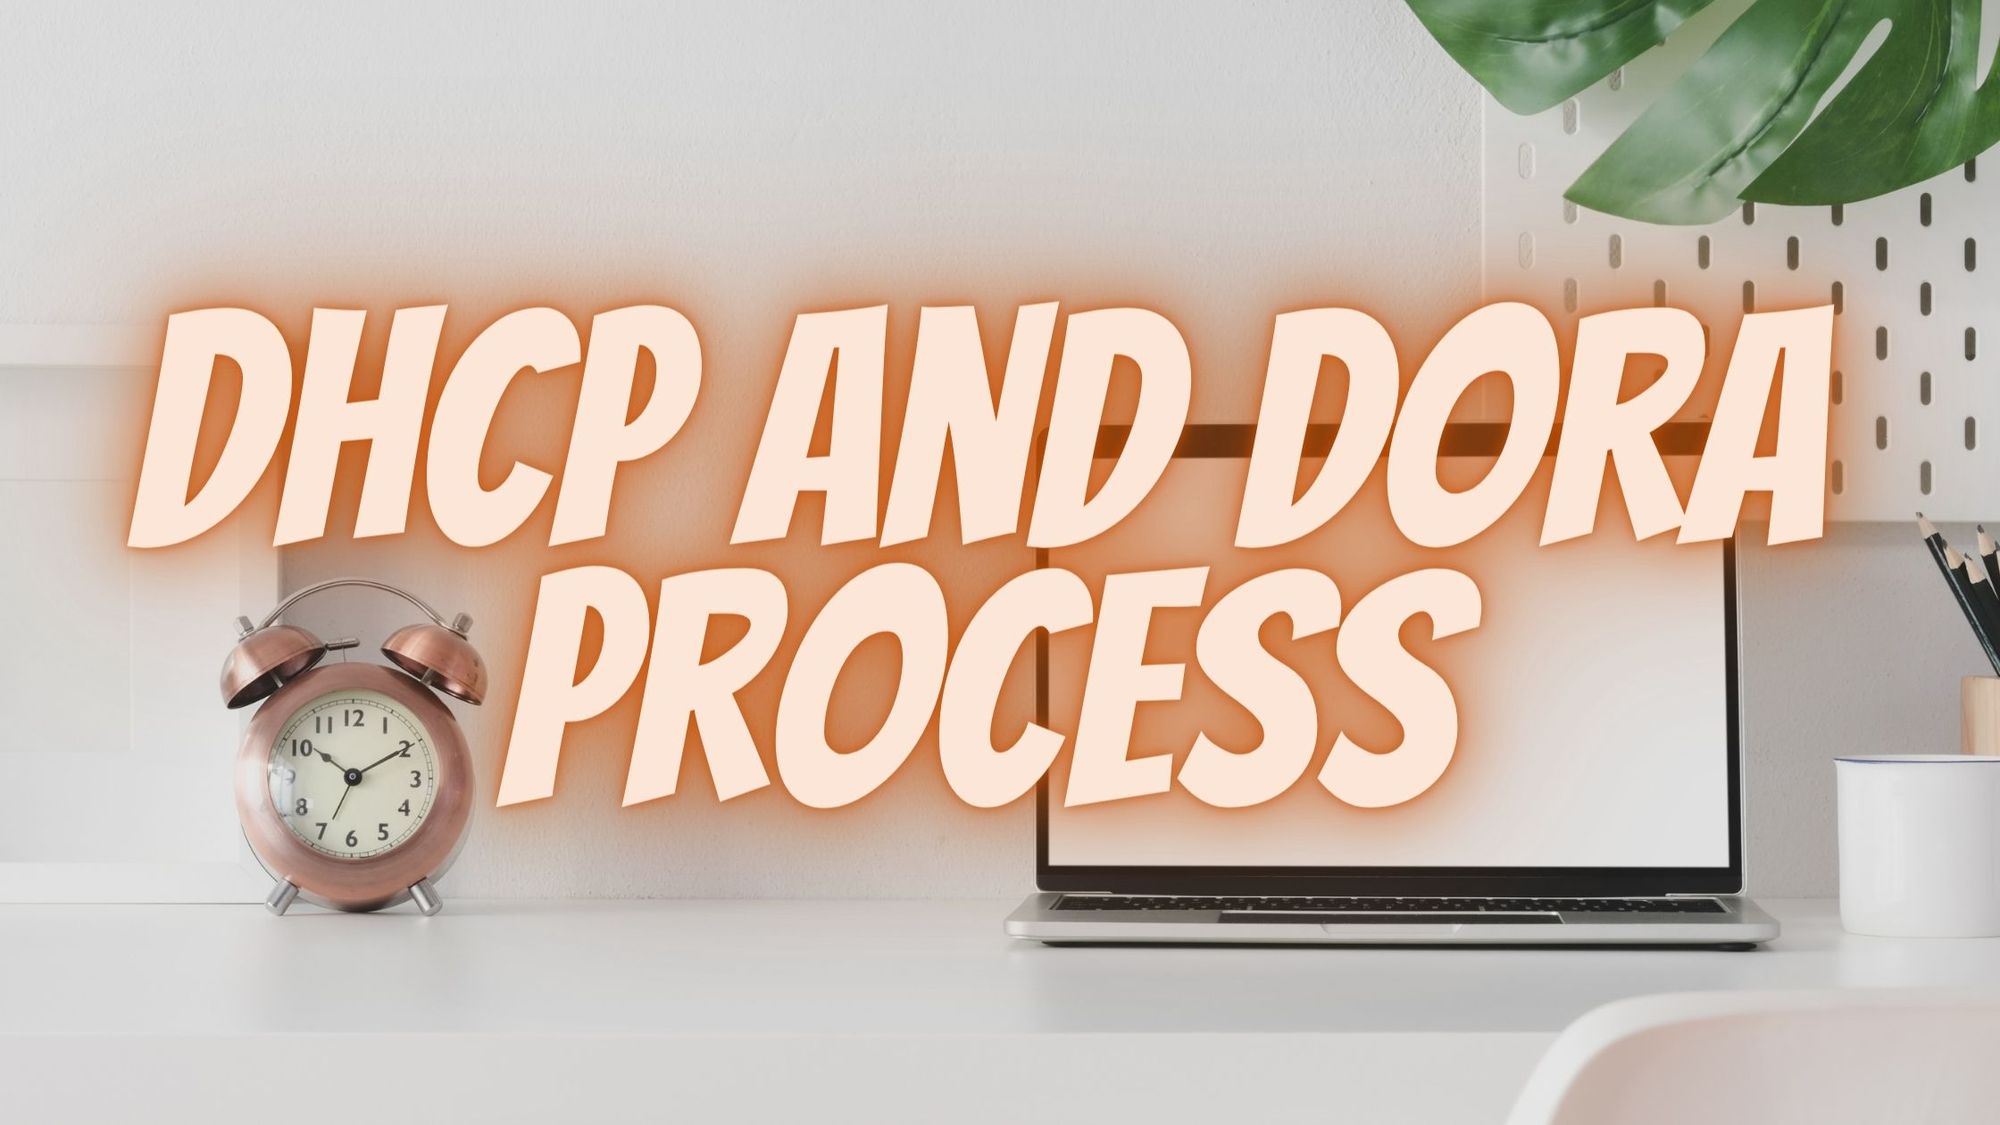 Introduction to DHCP and DHCP lab.